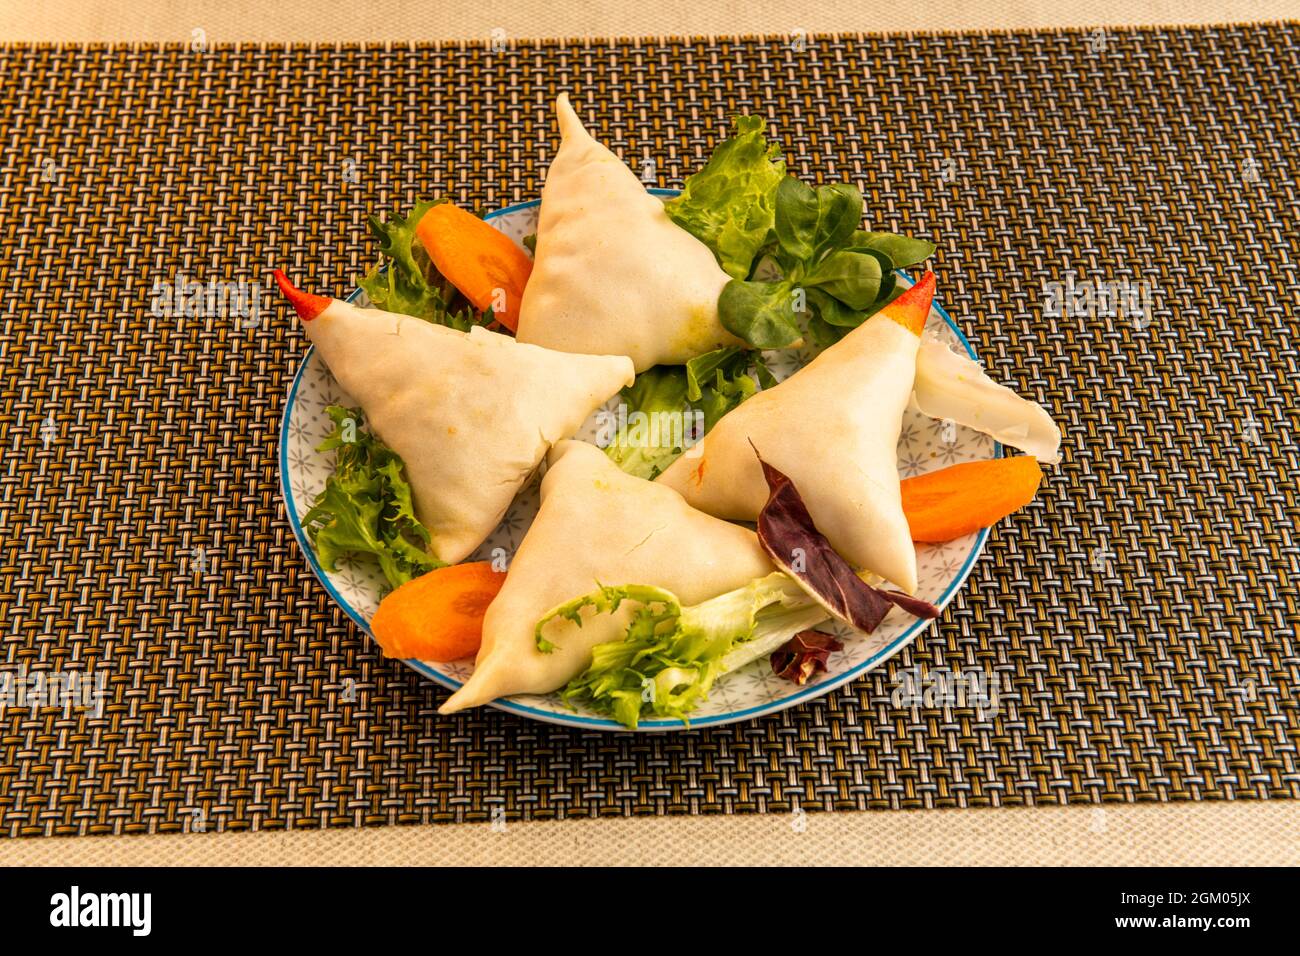 serving of Hindu vegetable samosa with lettuce and carrot garnish on a table in a Pakistani restaurant Stock Photo